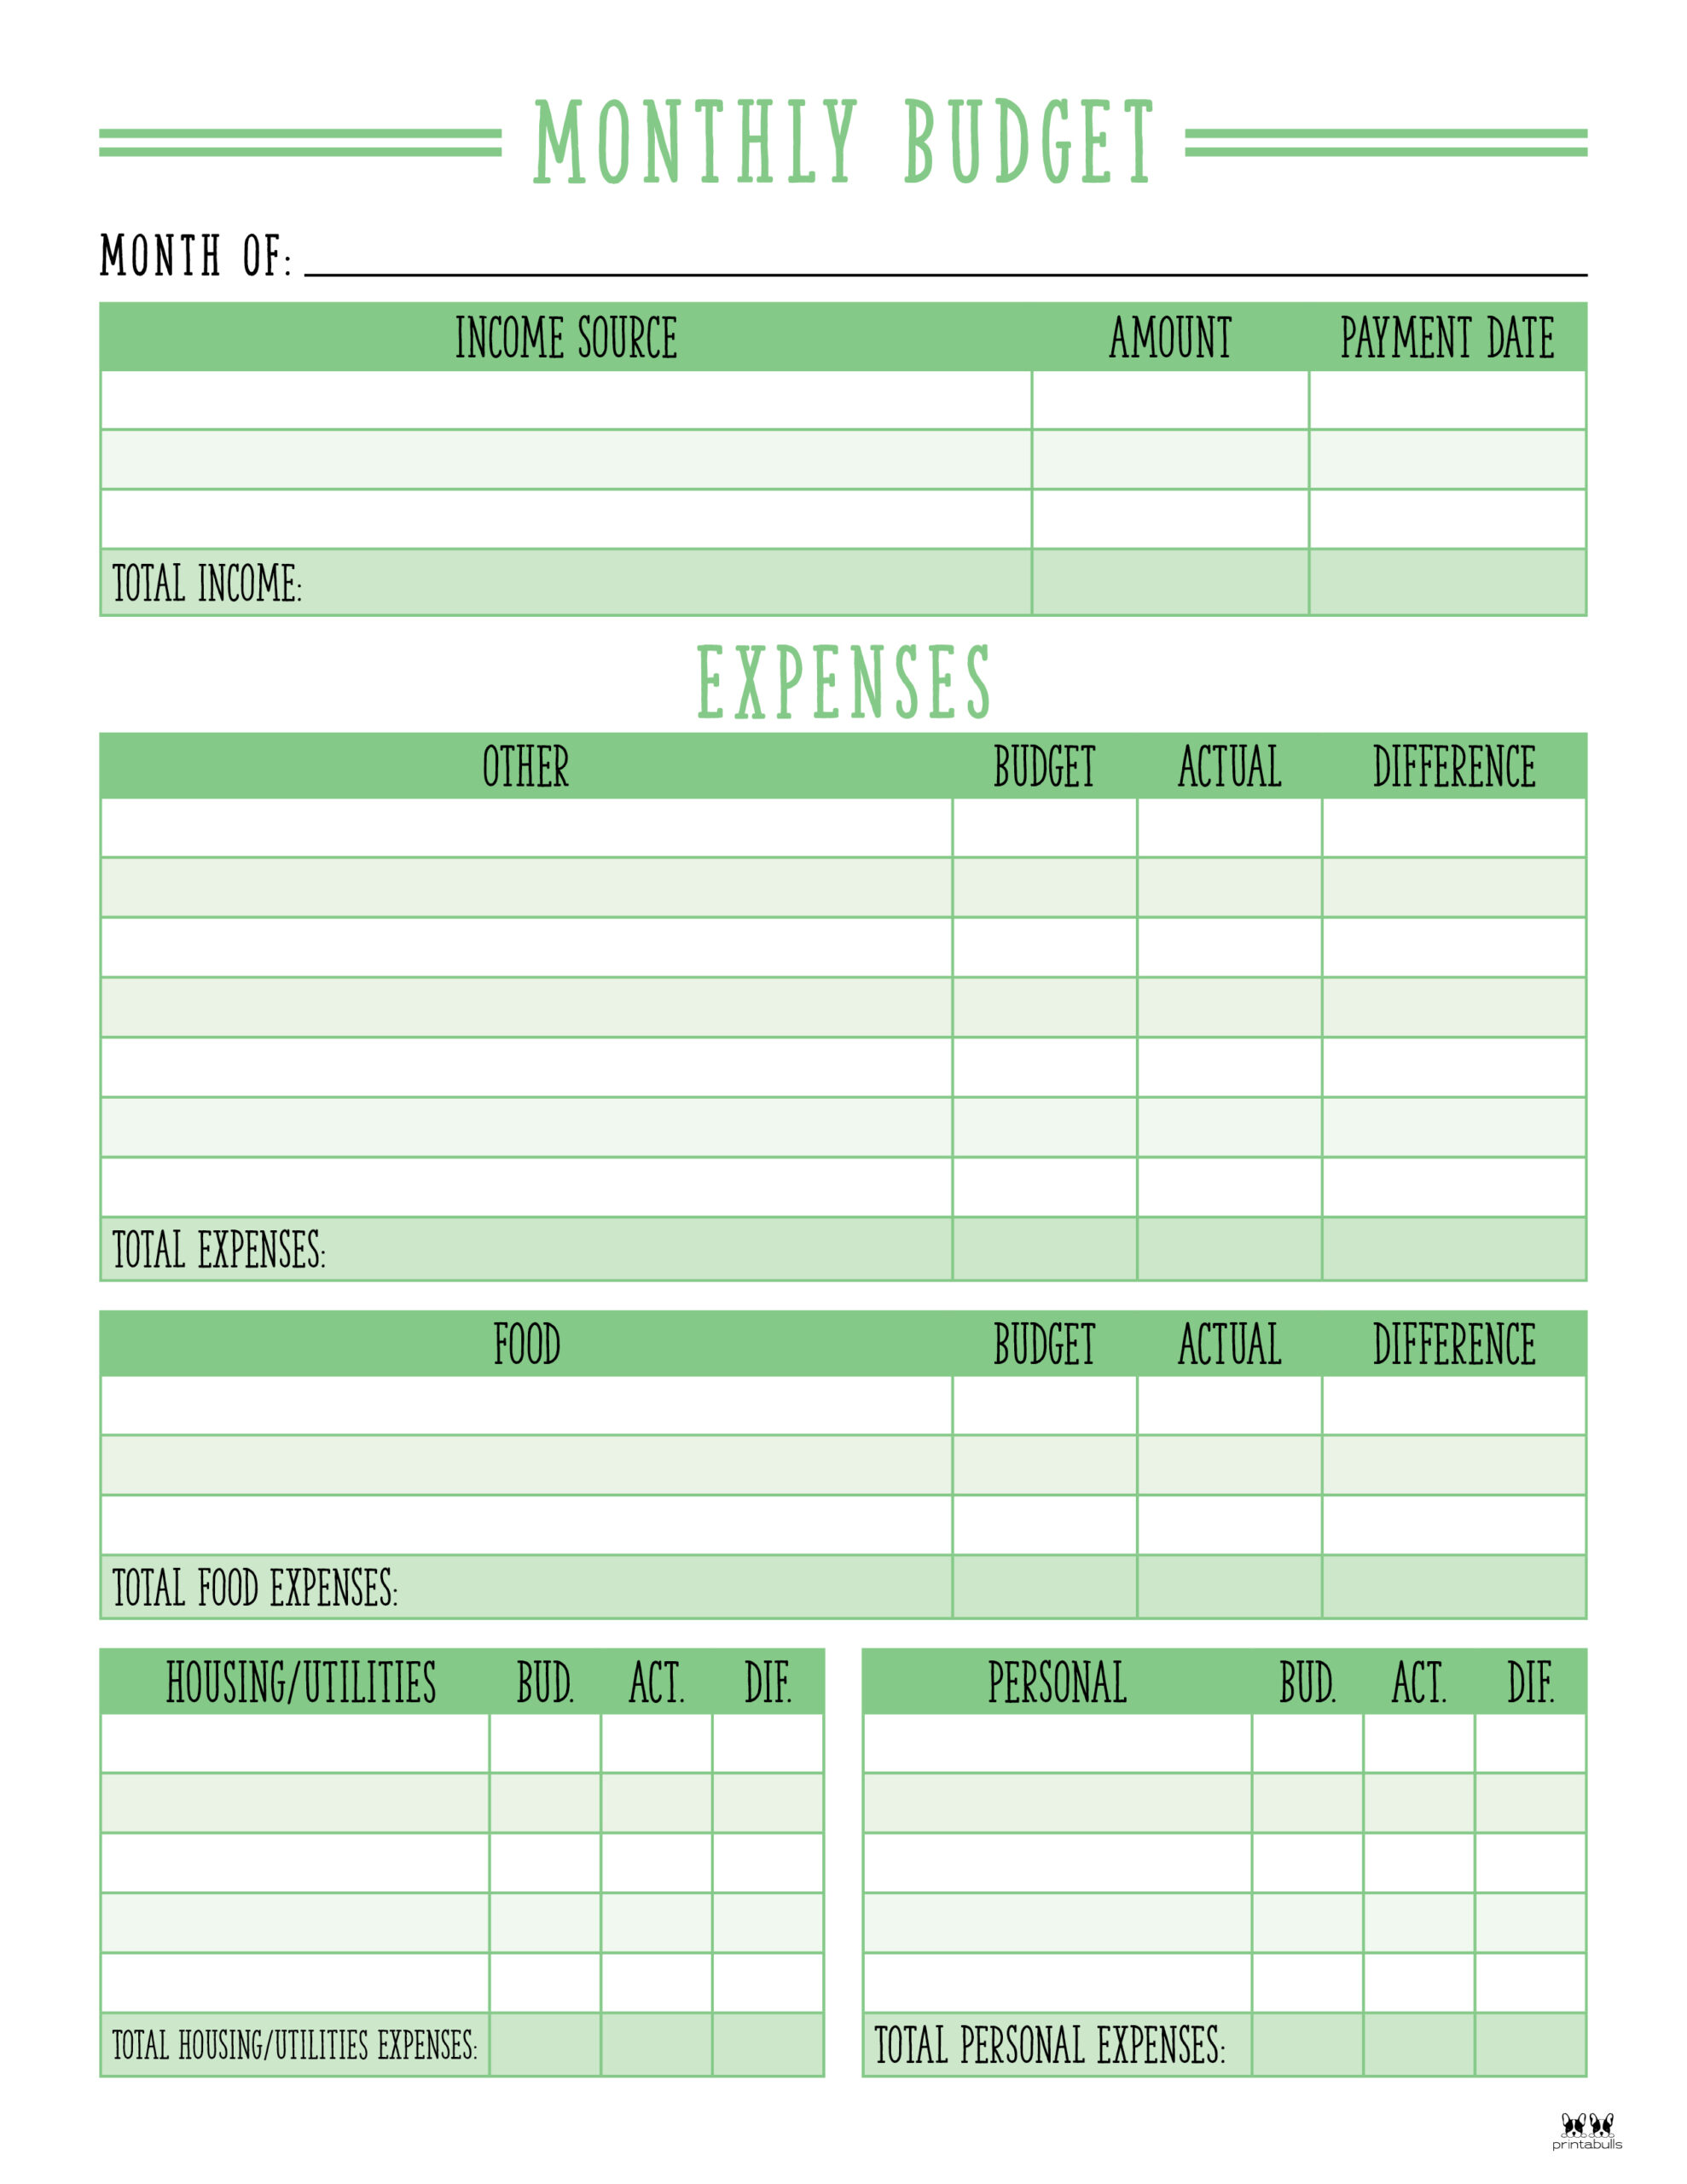 home budget planner template google sheets